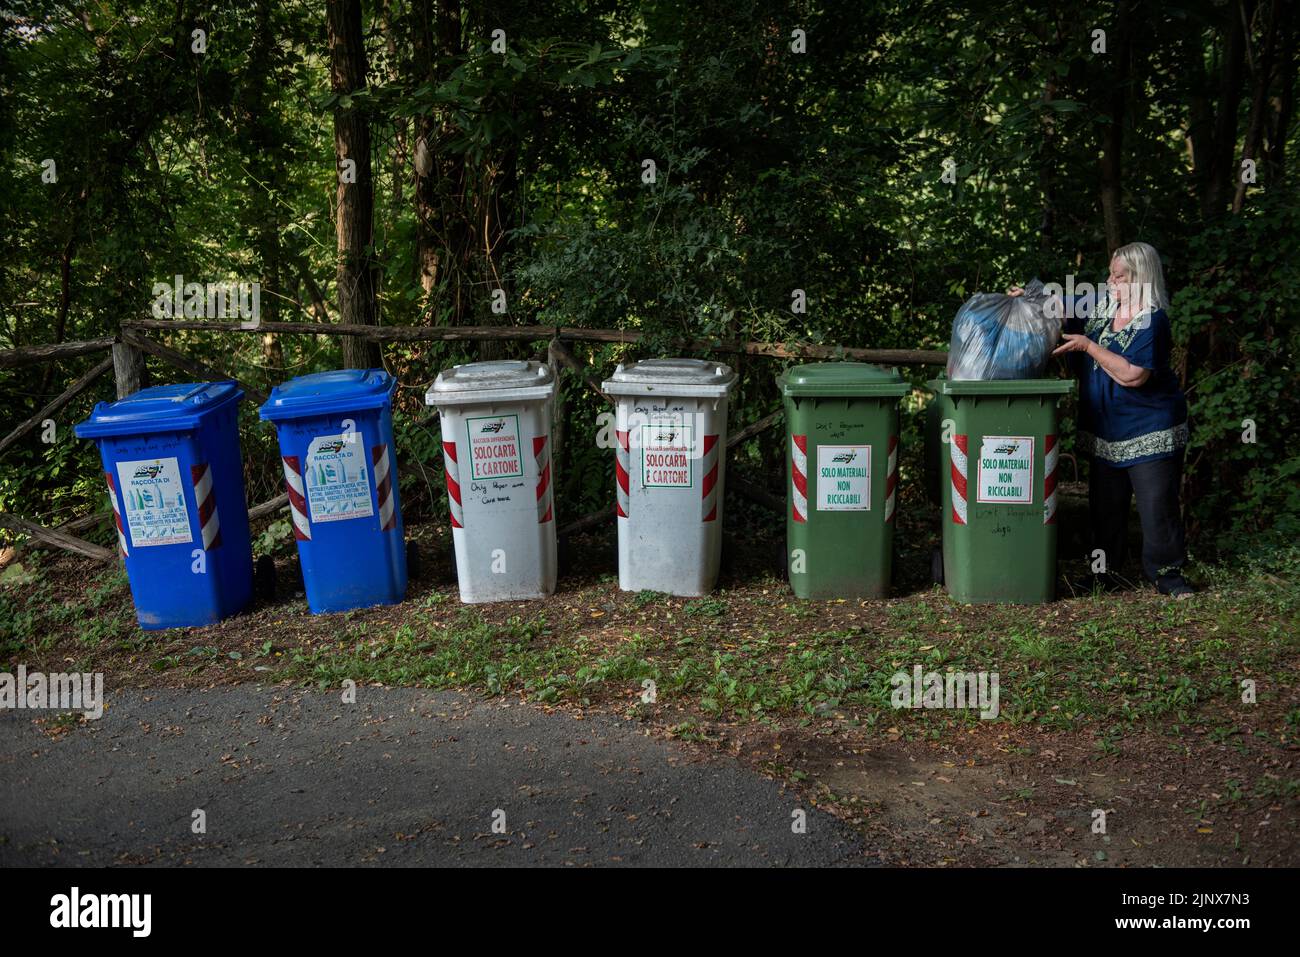 Italy Rubbish Bins Tuscany 2018 Model relaesed Woman recycles the rubbish into correct bins.woman, Stock Photo